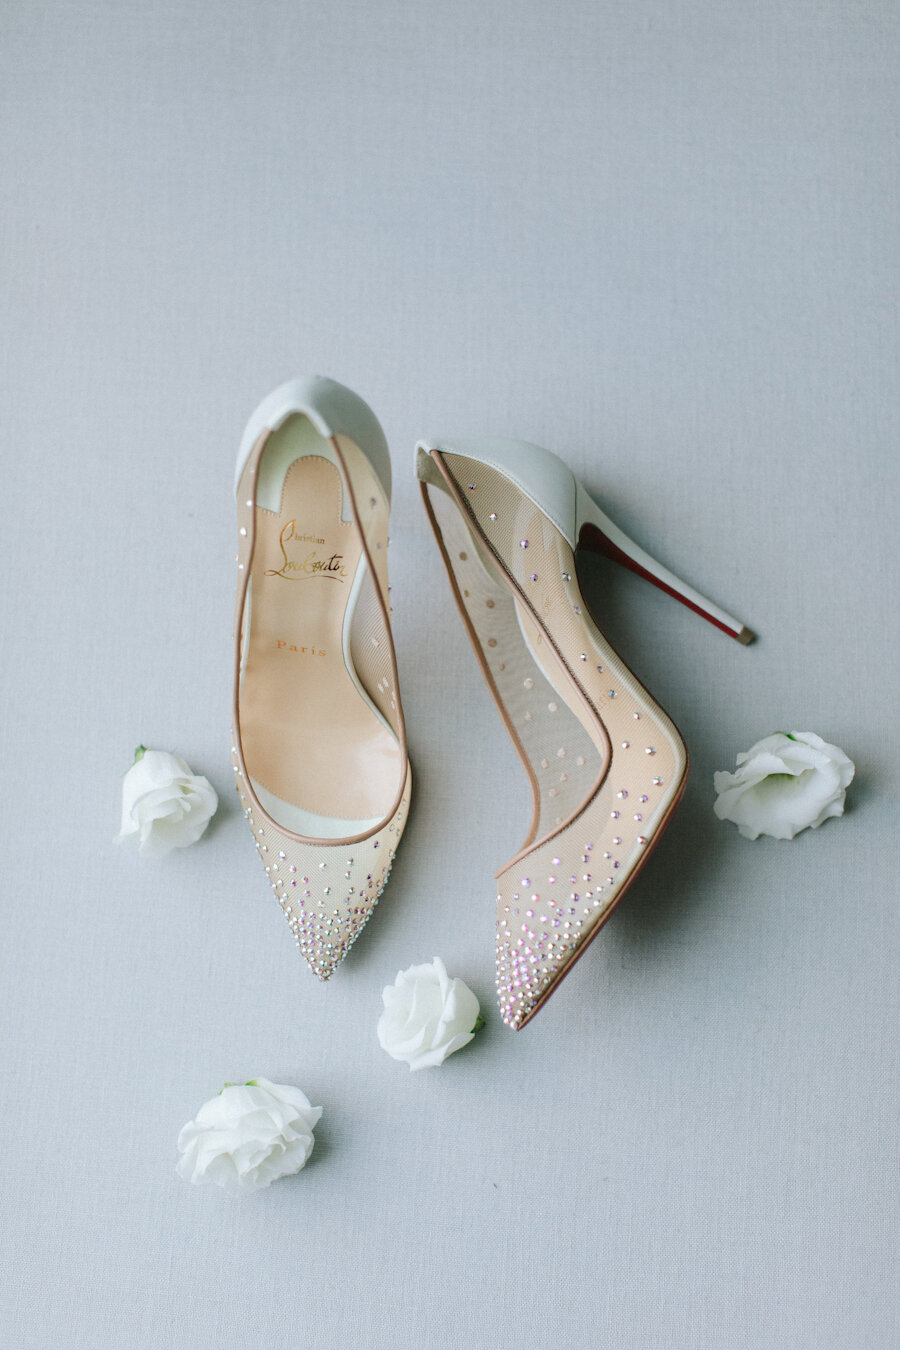 Christian Louboutin wedding shoes with sparkles